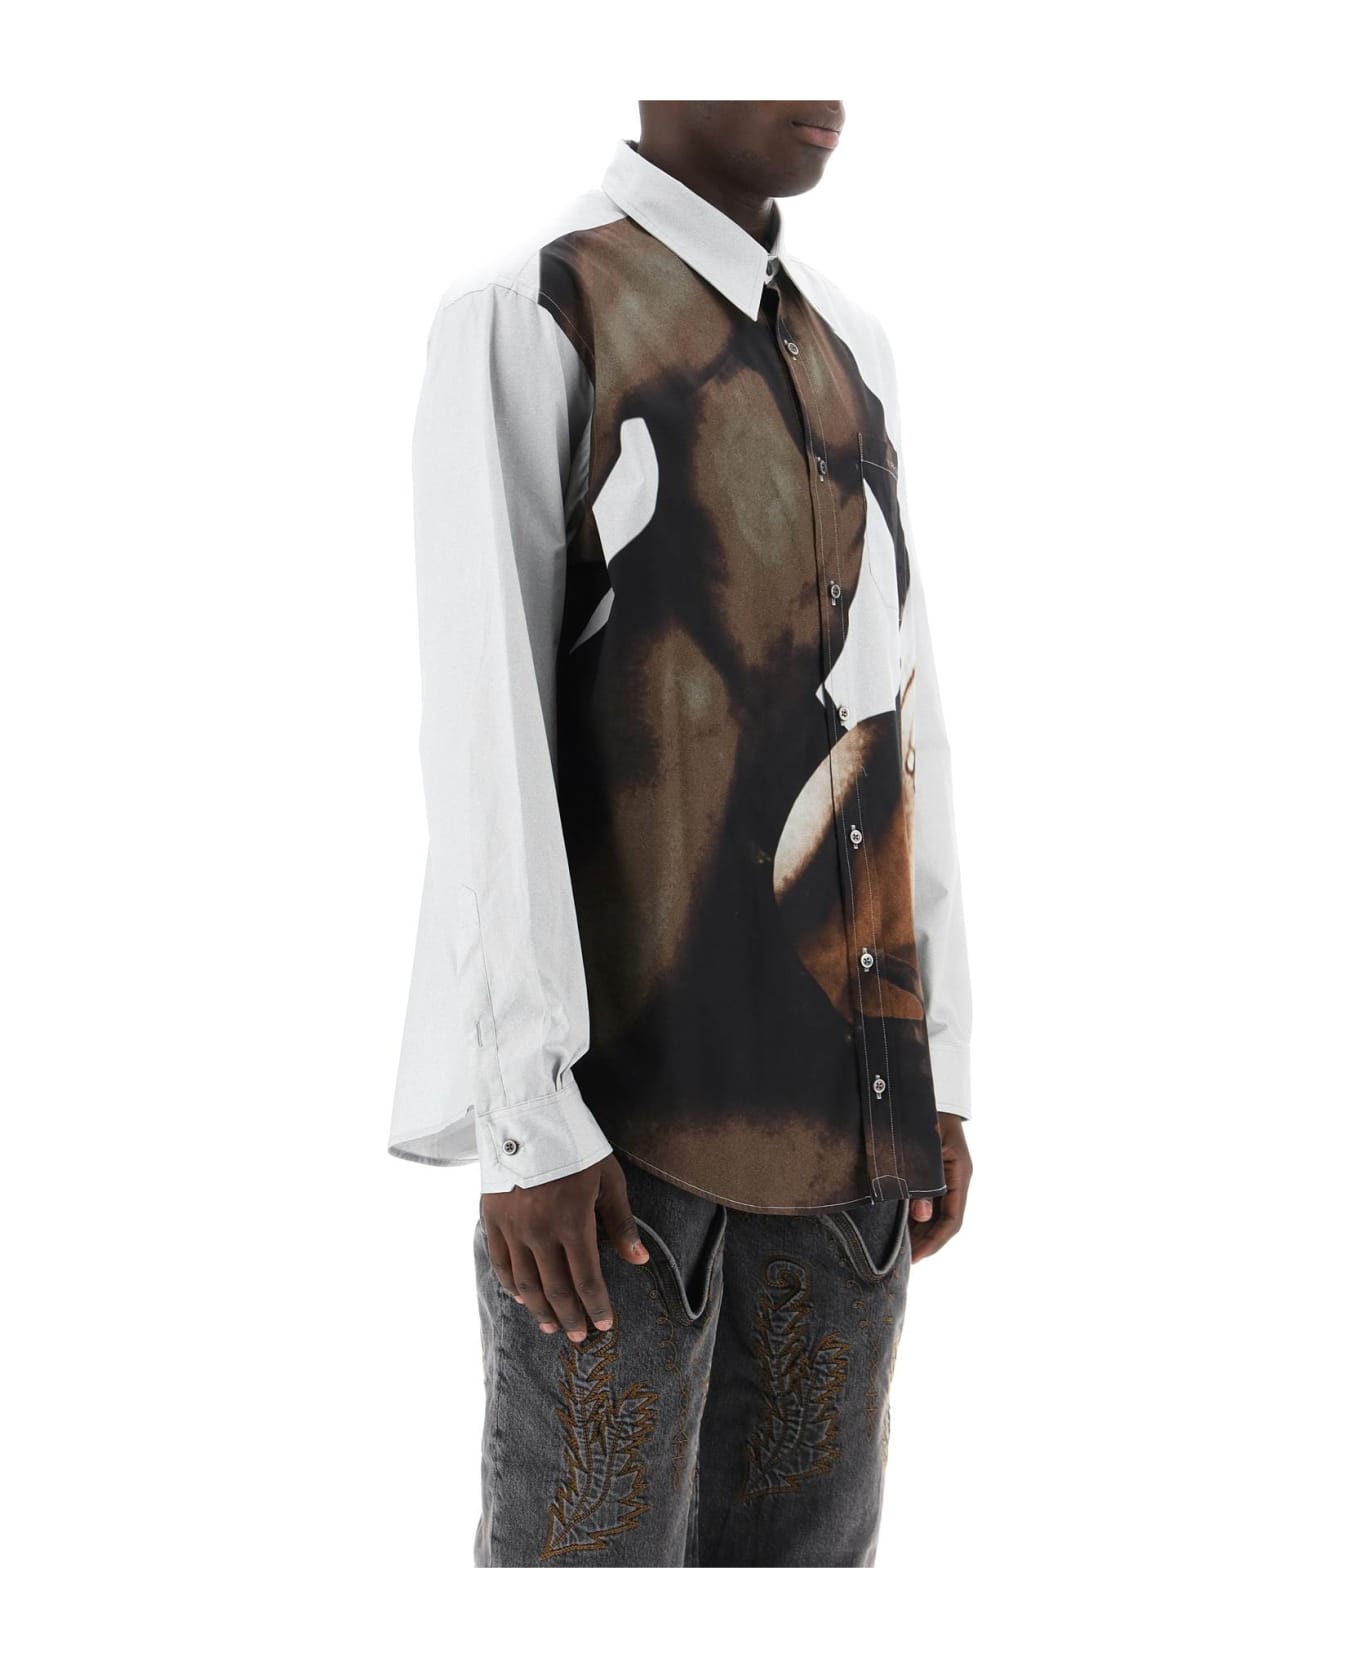 Y/Project Body Collage Shirt - WHITE (Grey)